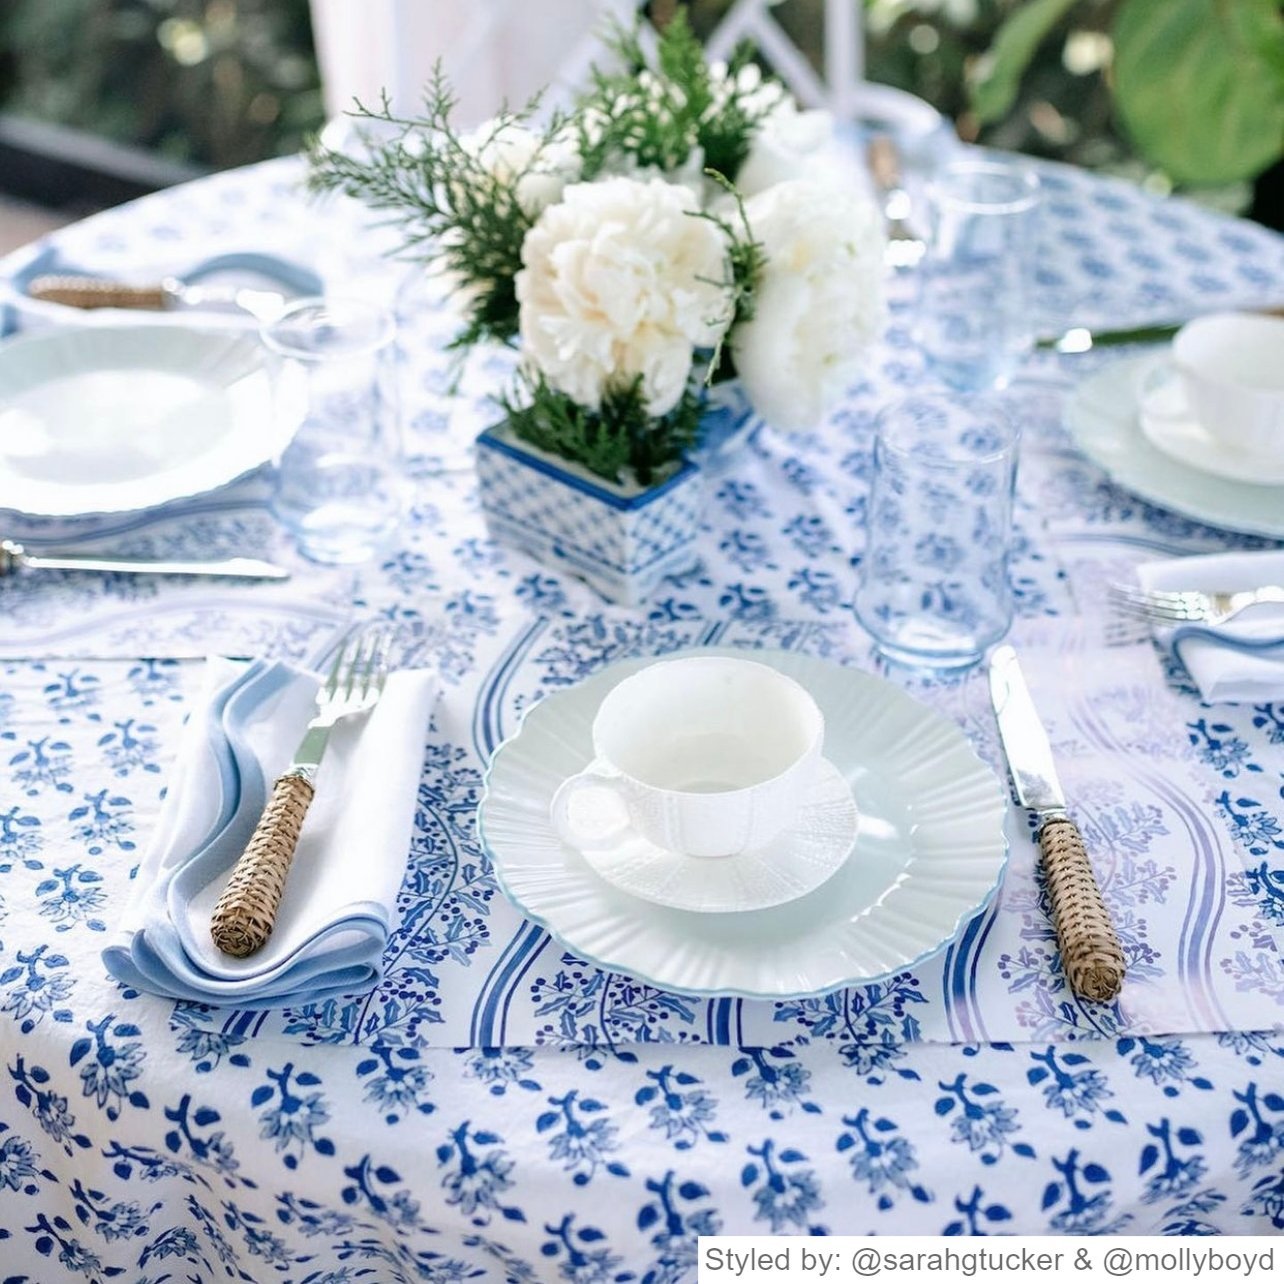 Table setting with blue and white holly paper placemats layered with white dishes and a teacup on a blue and white floral tablecloth with a white floral centerpiece